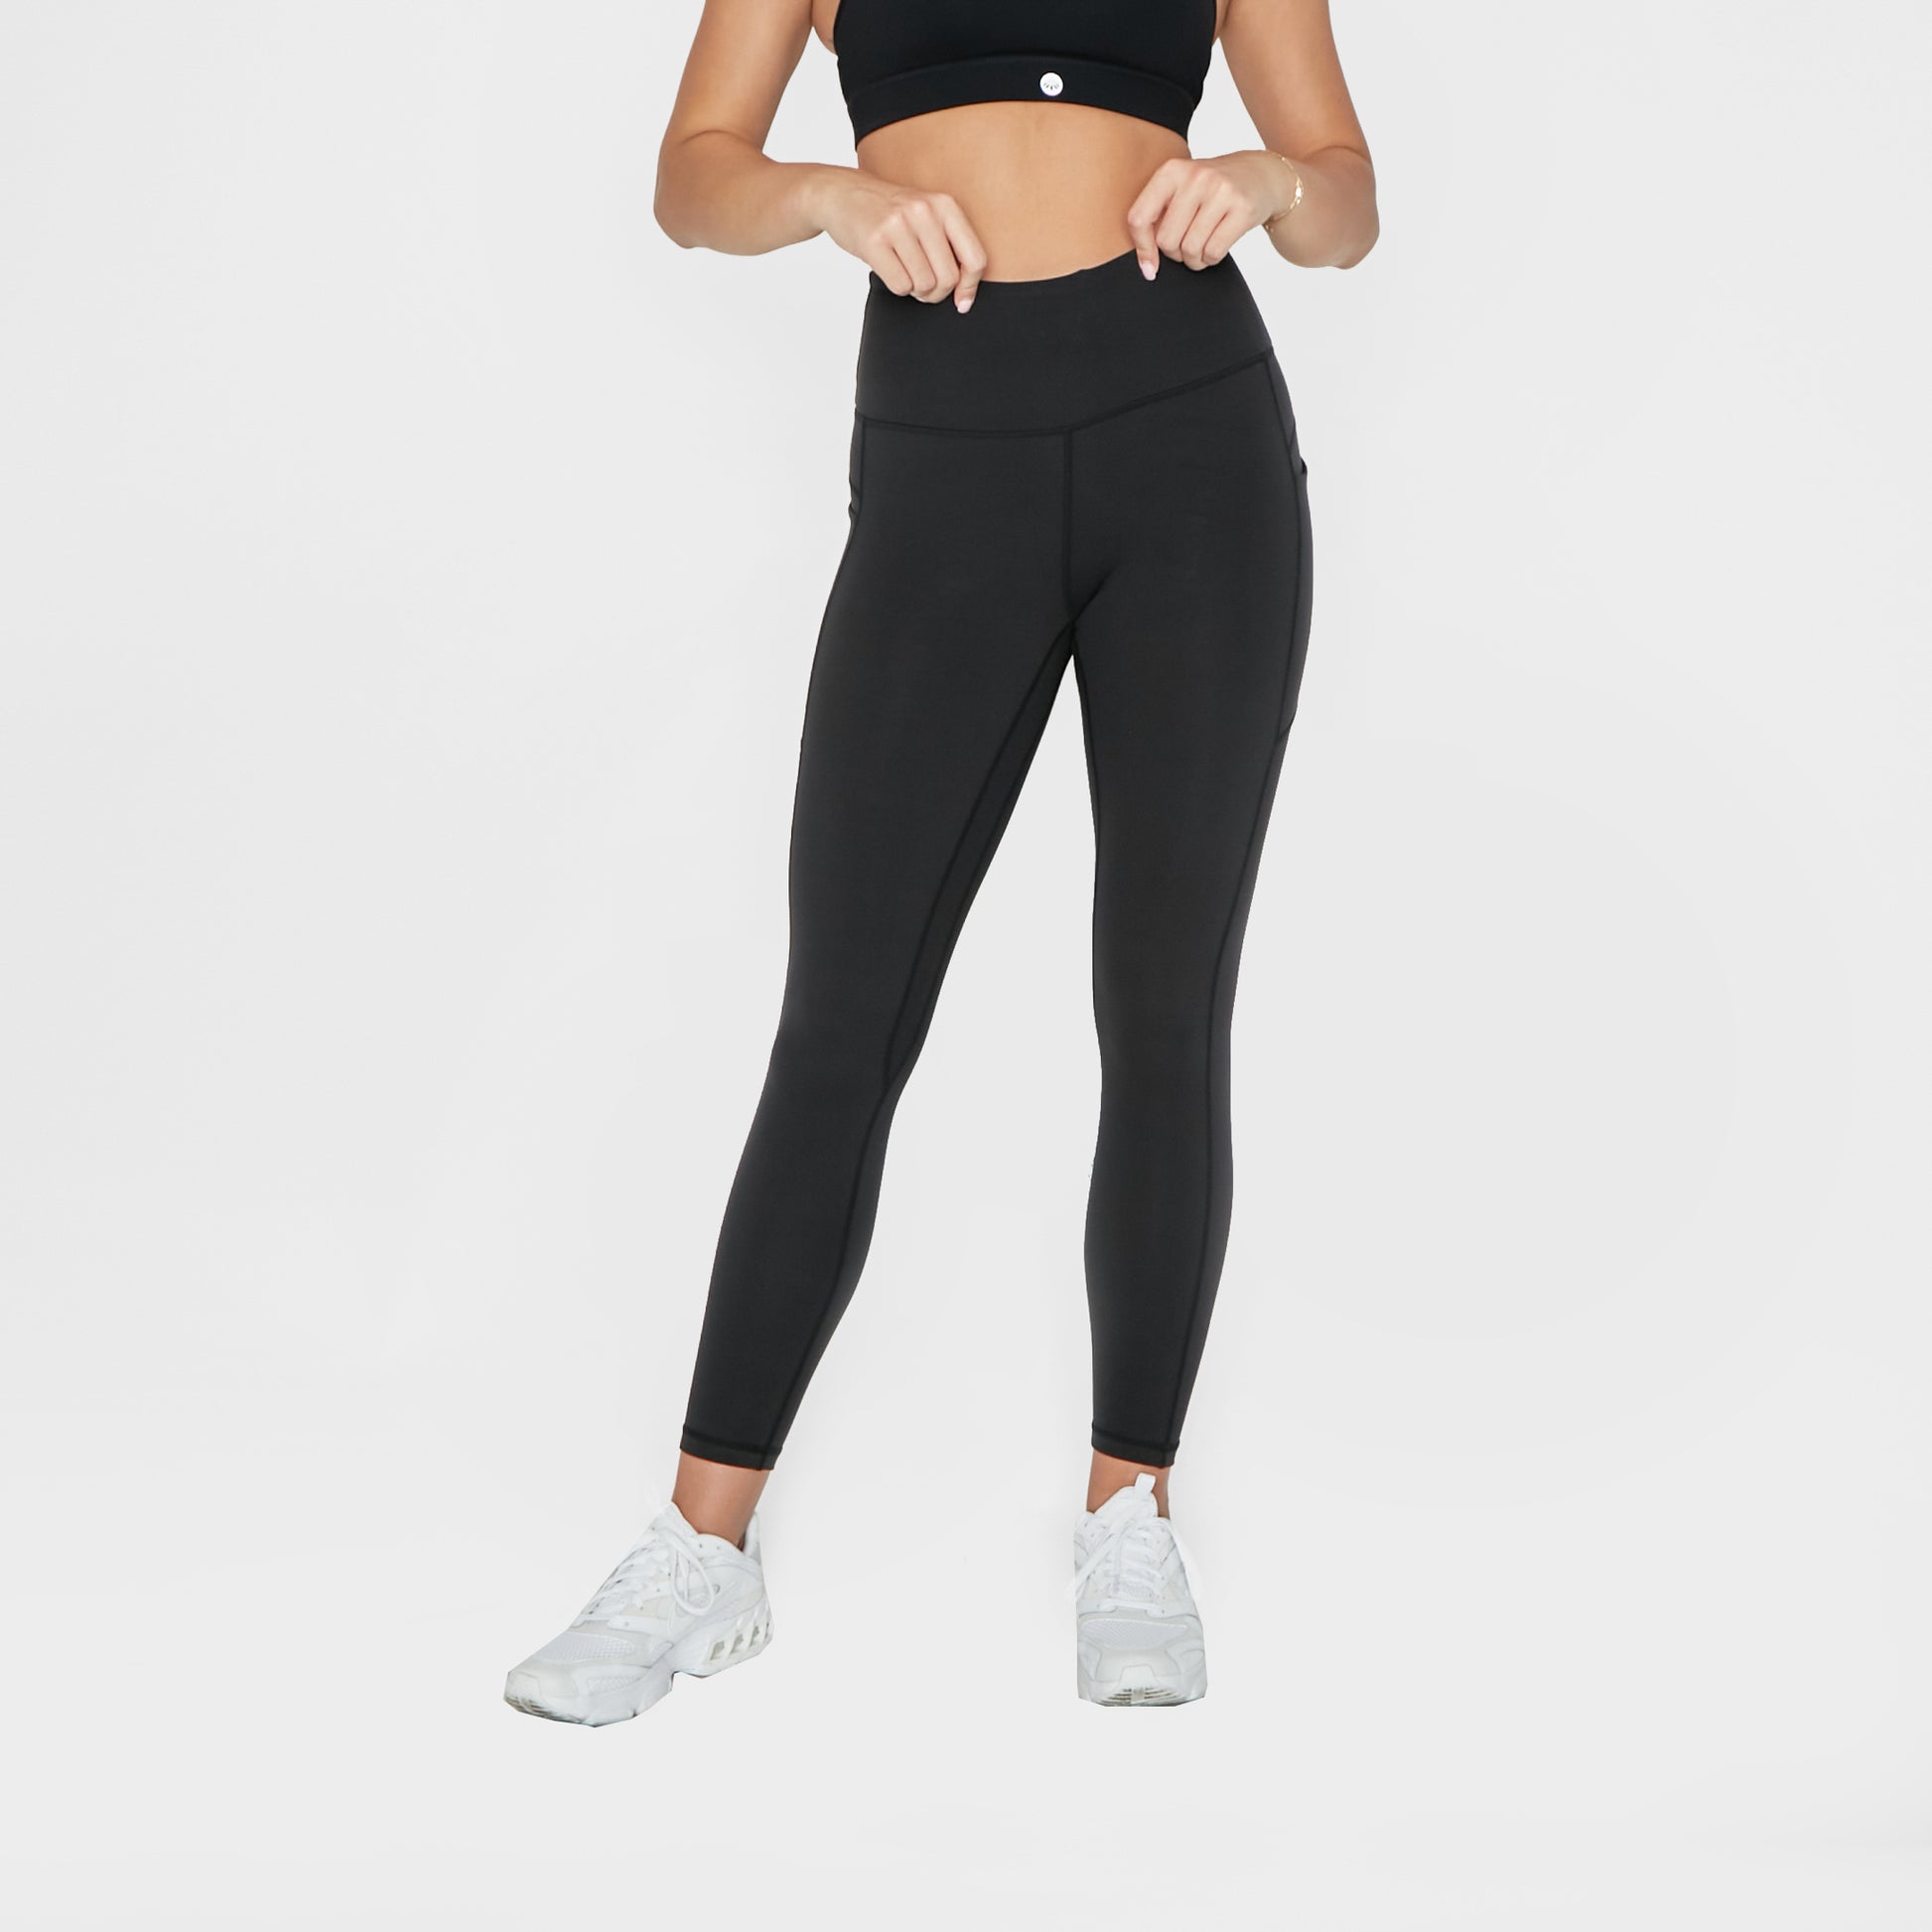 Lululemon Athletica Here To There 7/8 High Rise Pant Dark Grey